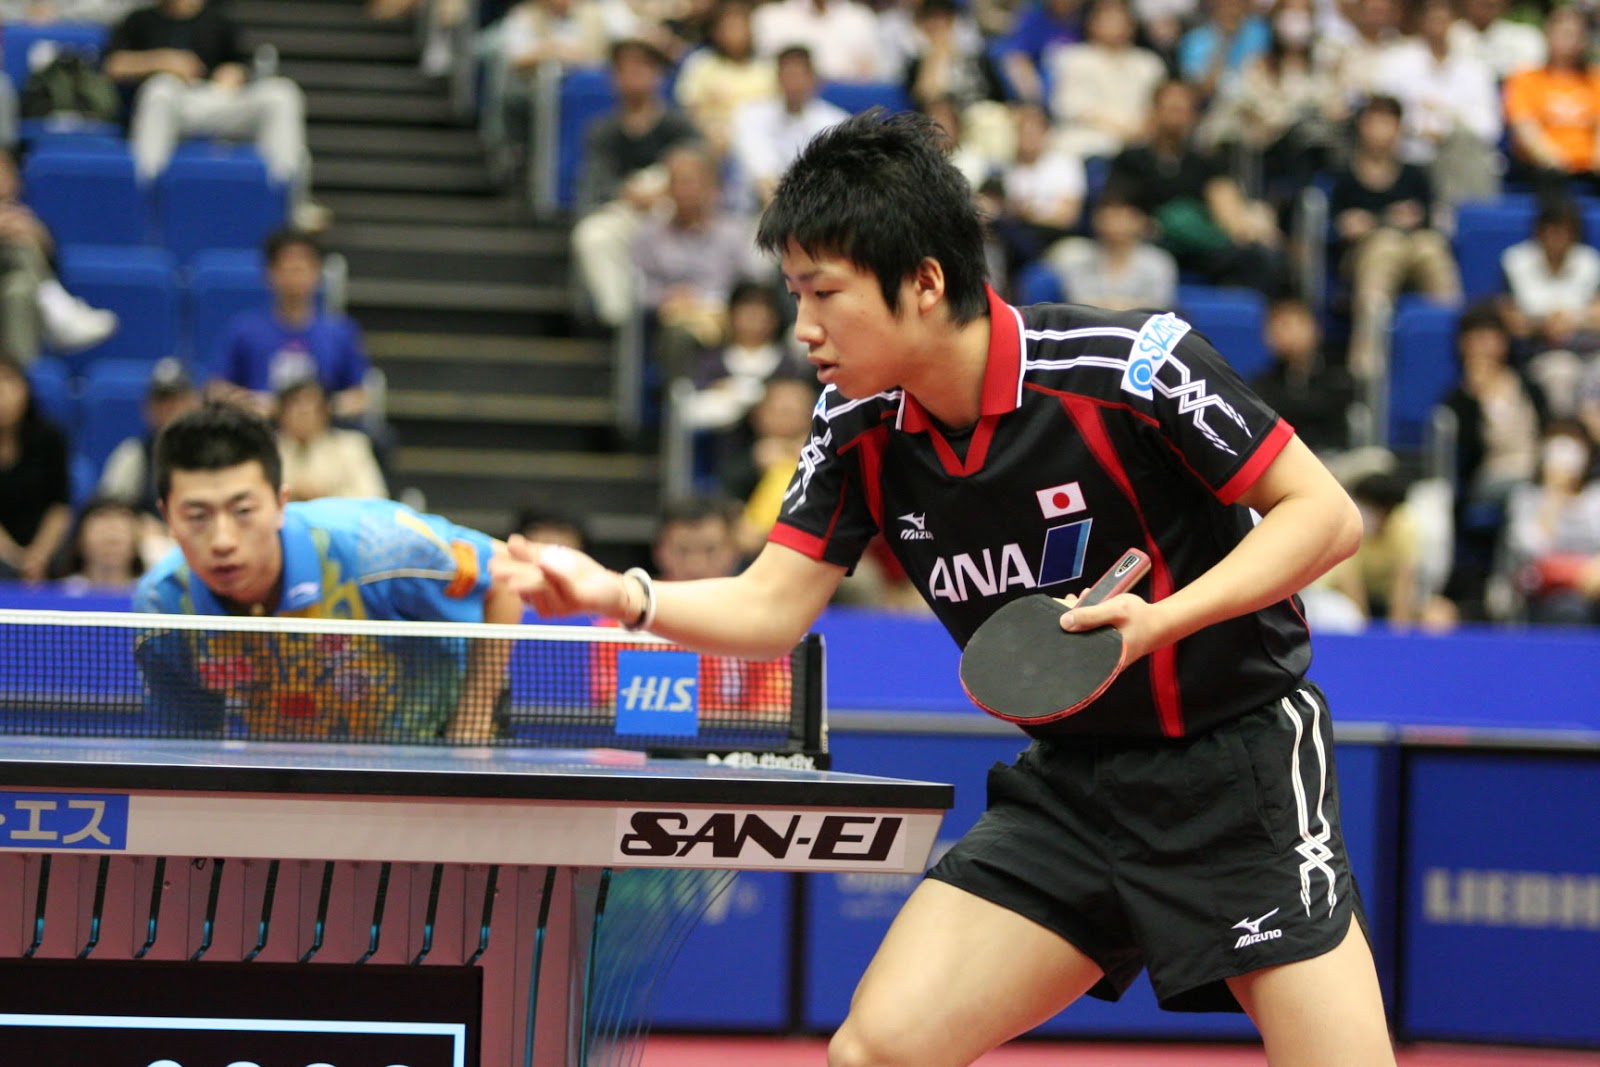 MHTableTennis How to Win Crucial Points in Table Tennis Matches